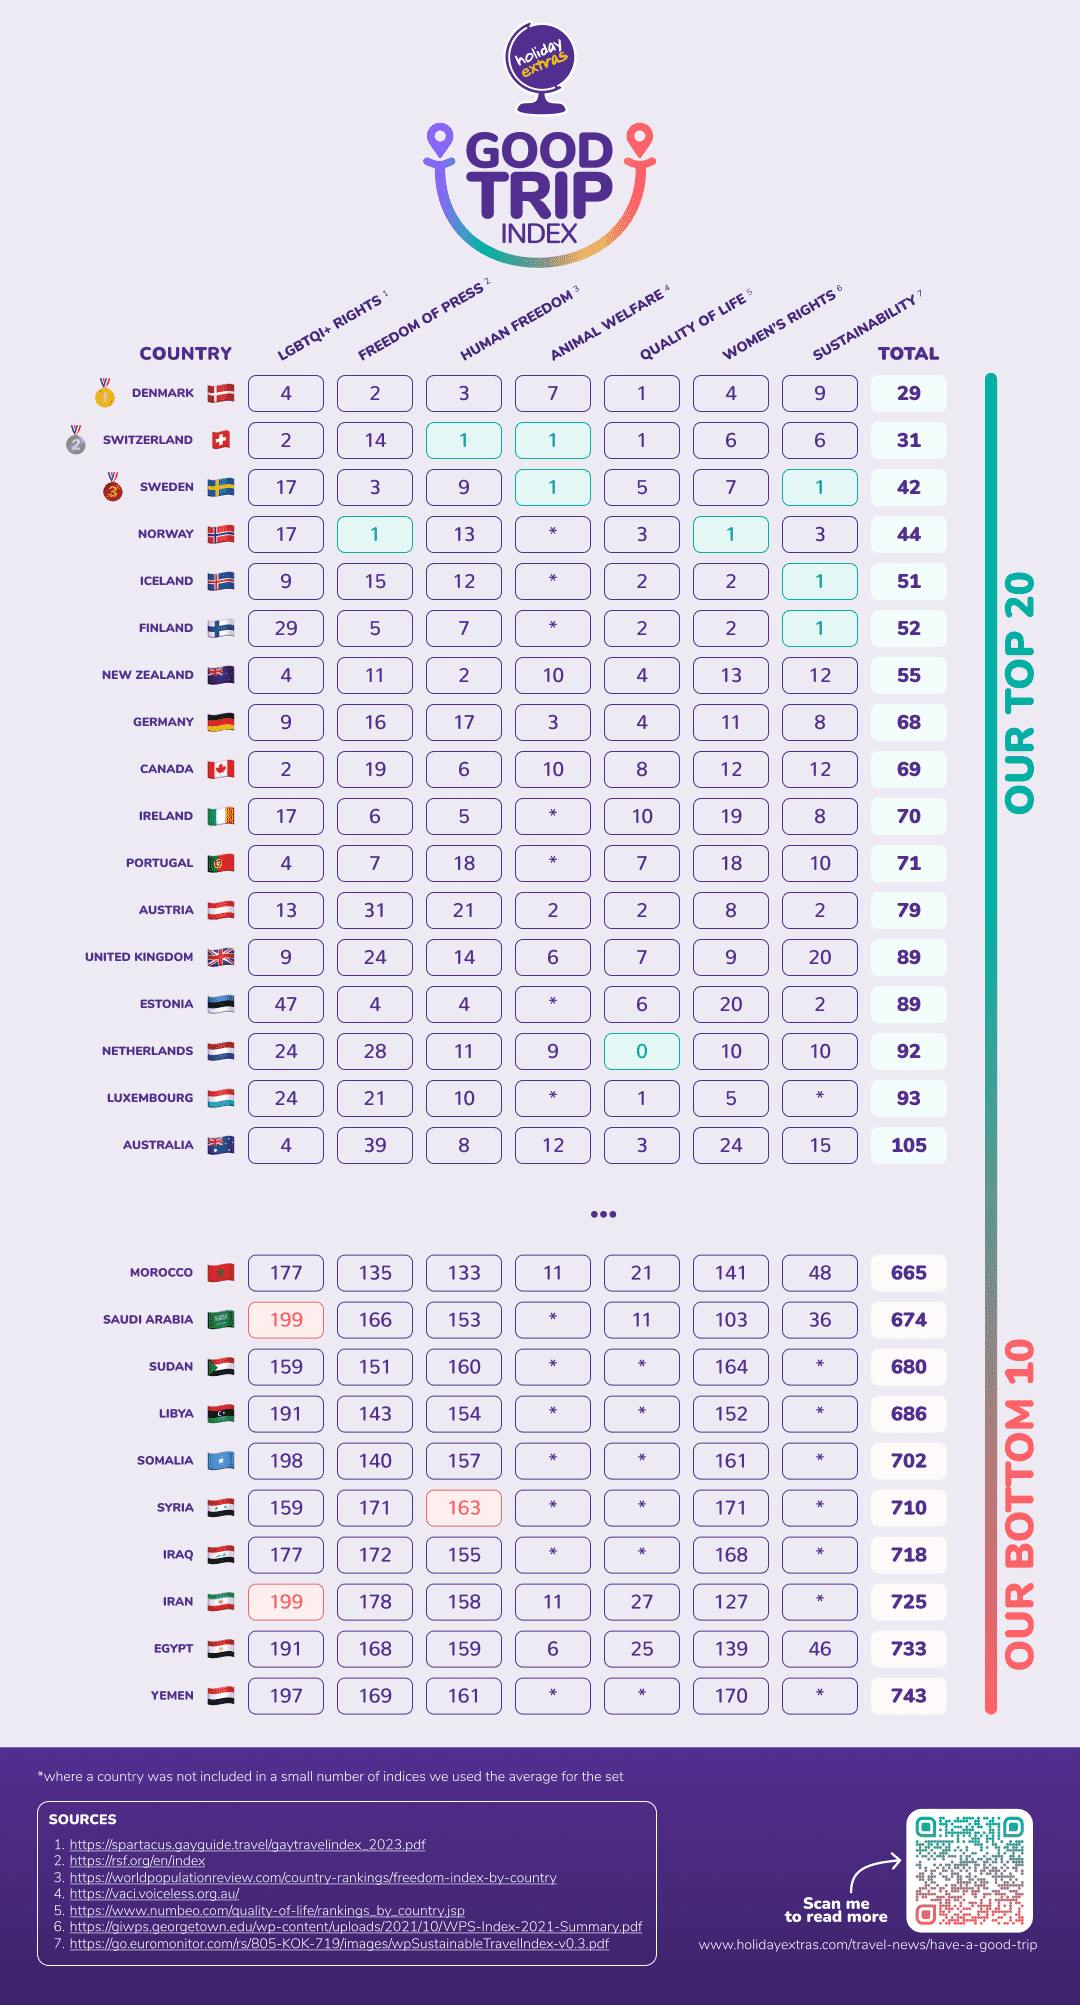 The top 20 and bottom 10 countries on the Good Trip Index